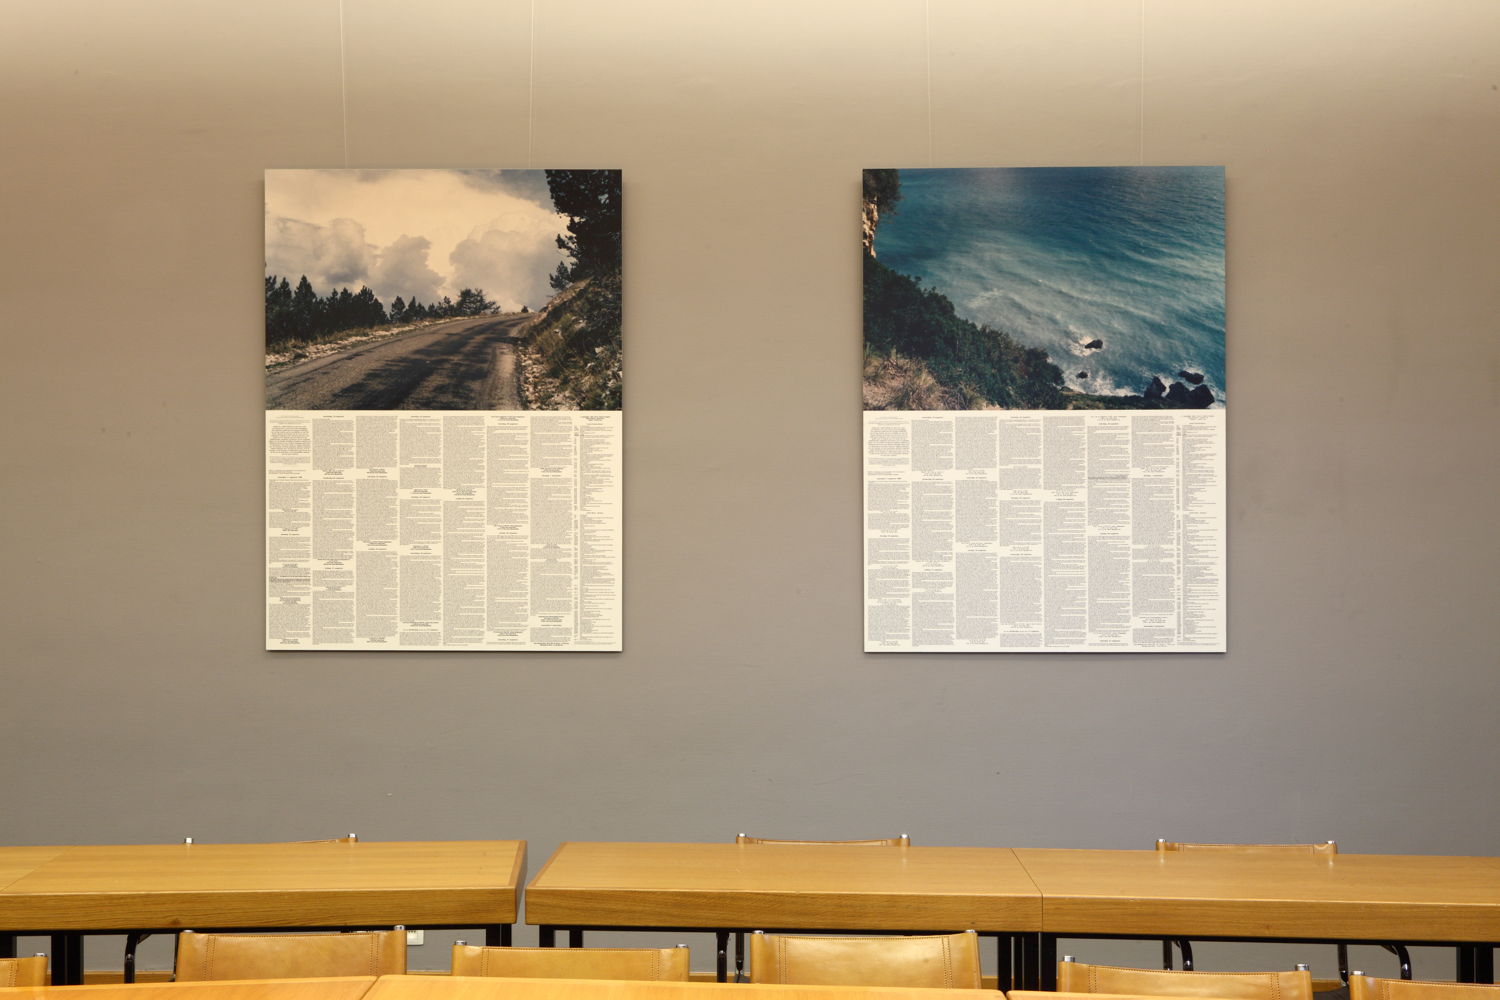 Installation view of the exhibition 'Entre nous quelque chose se passe...' in the Library of the Faculty of Law, KU Leuven.
Artist and work: Christoph Fink, Beweging#35, Gent - Etna (zomer 1997)
Photo © Dirk Pauwels